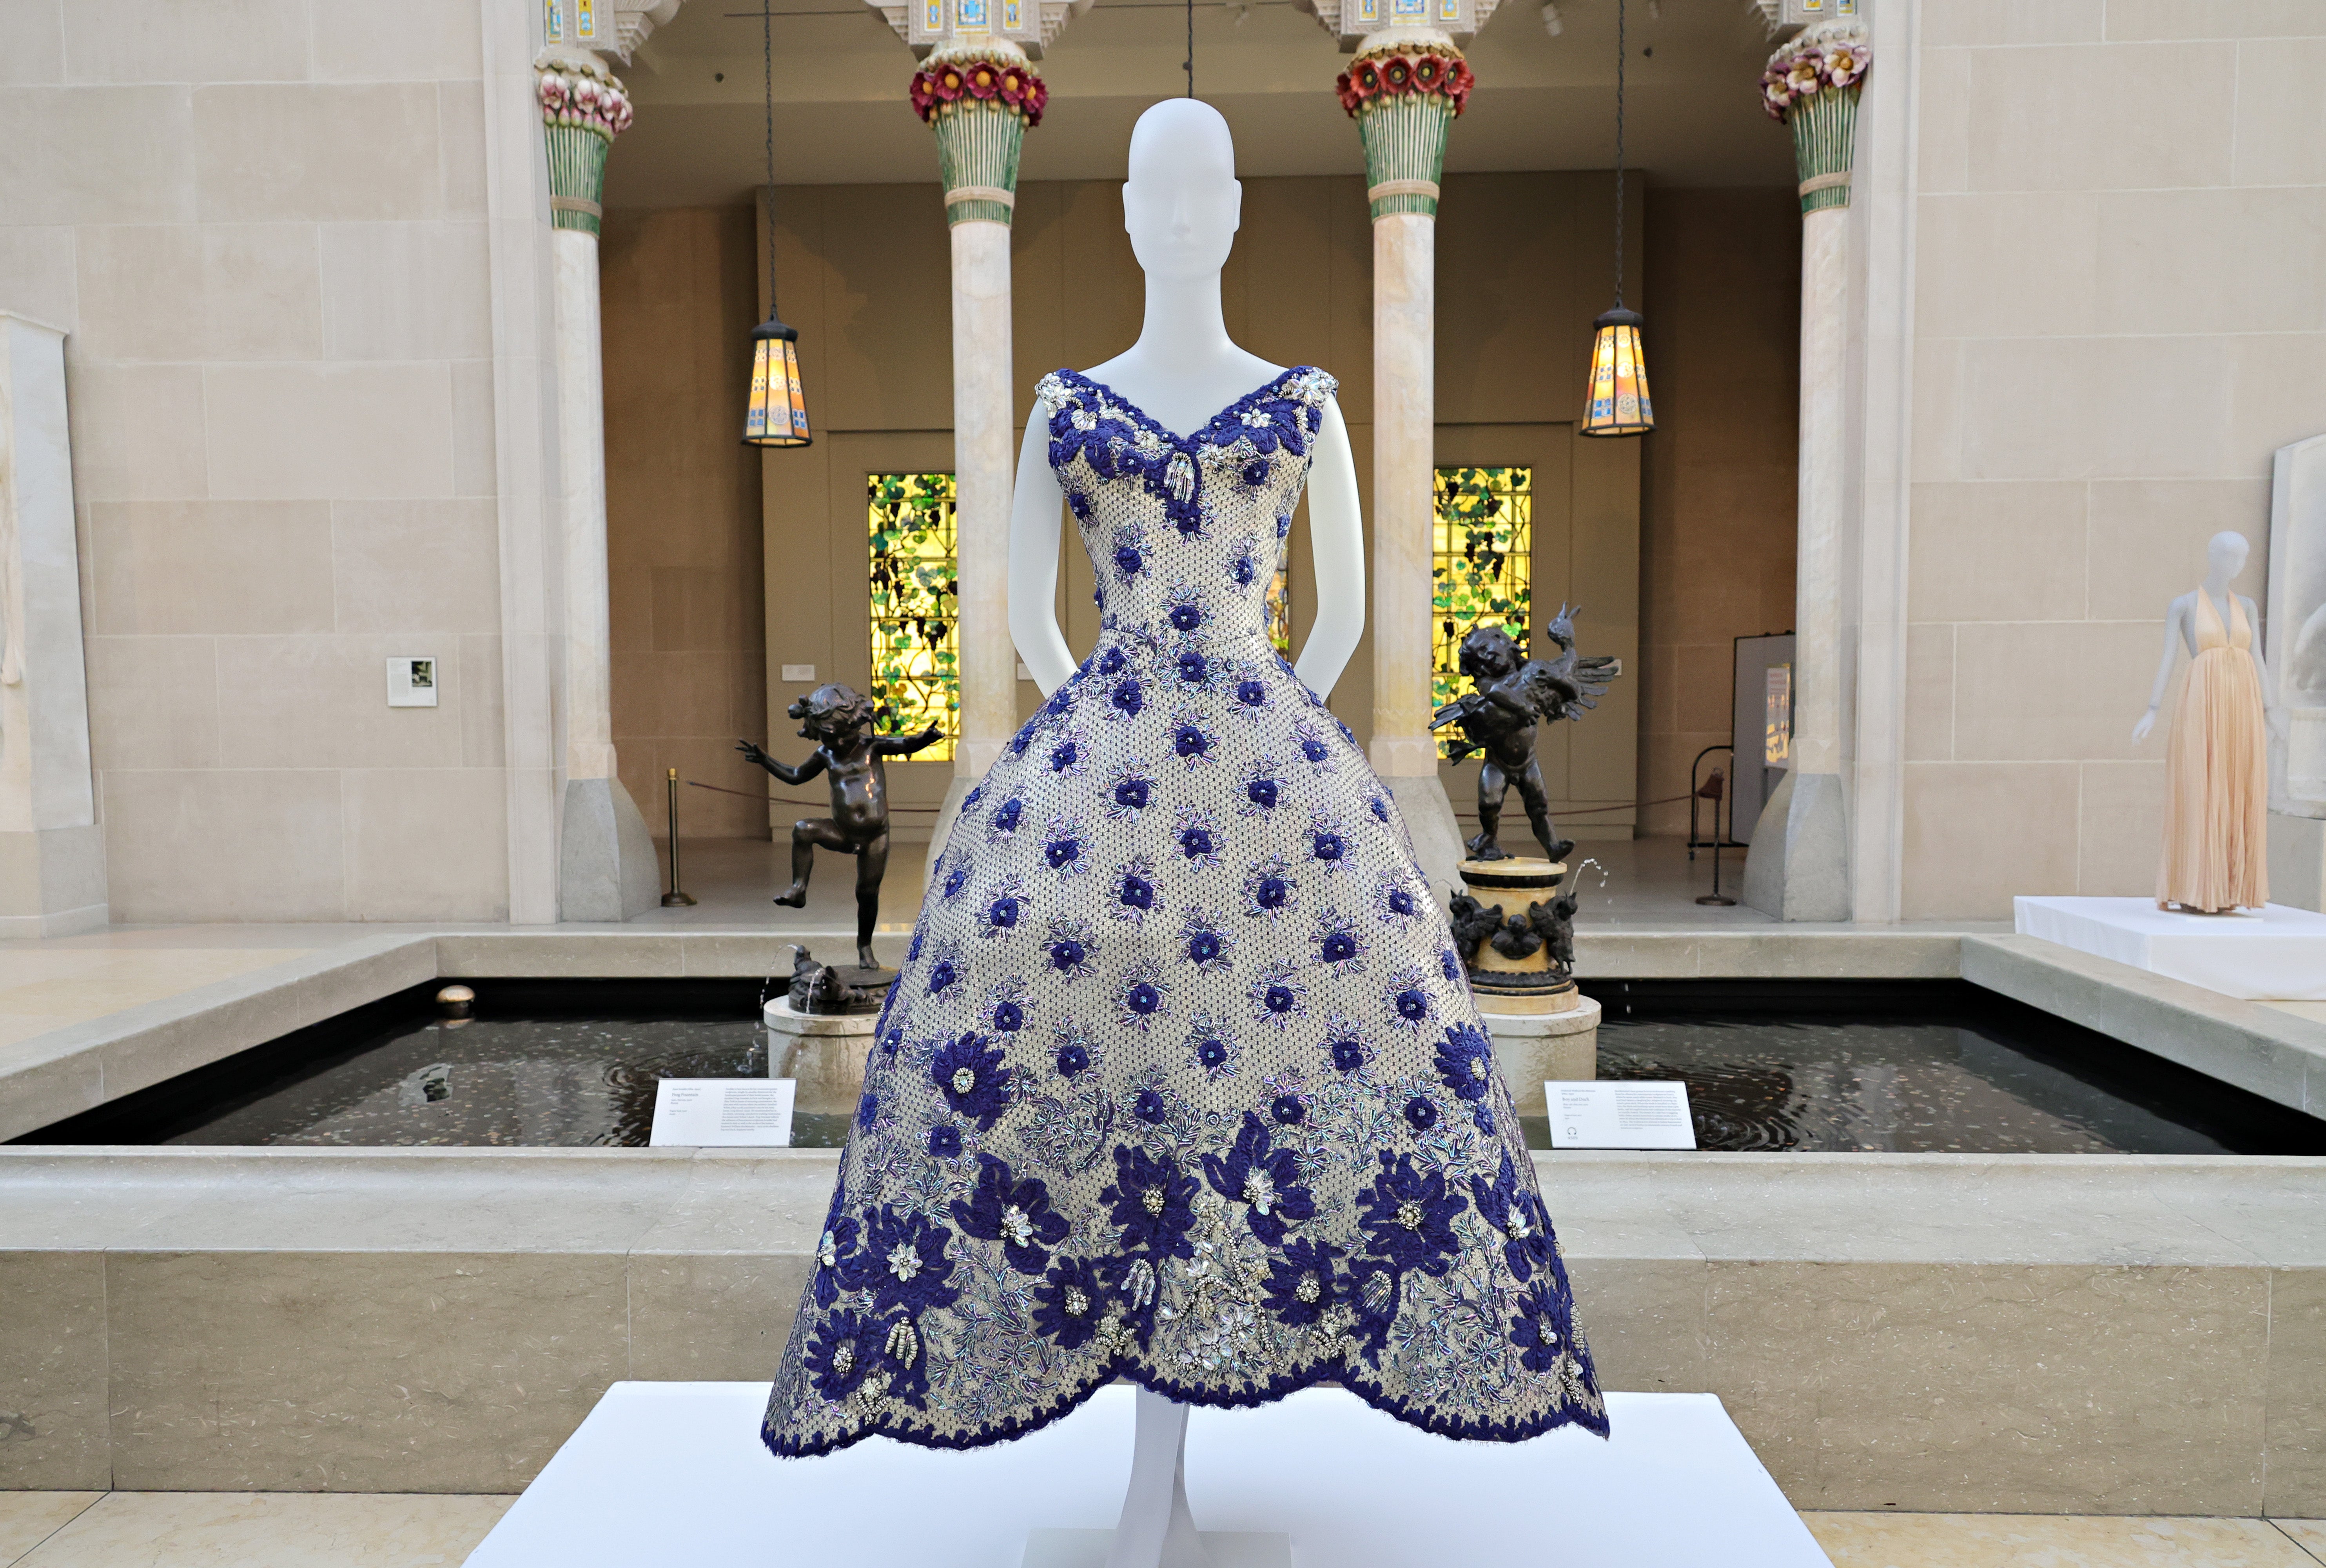 A preview of the Costume Institute’s “In America: An Anthology Of Fashion” exhibit